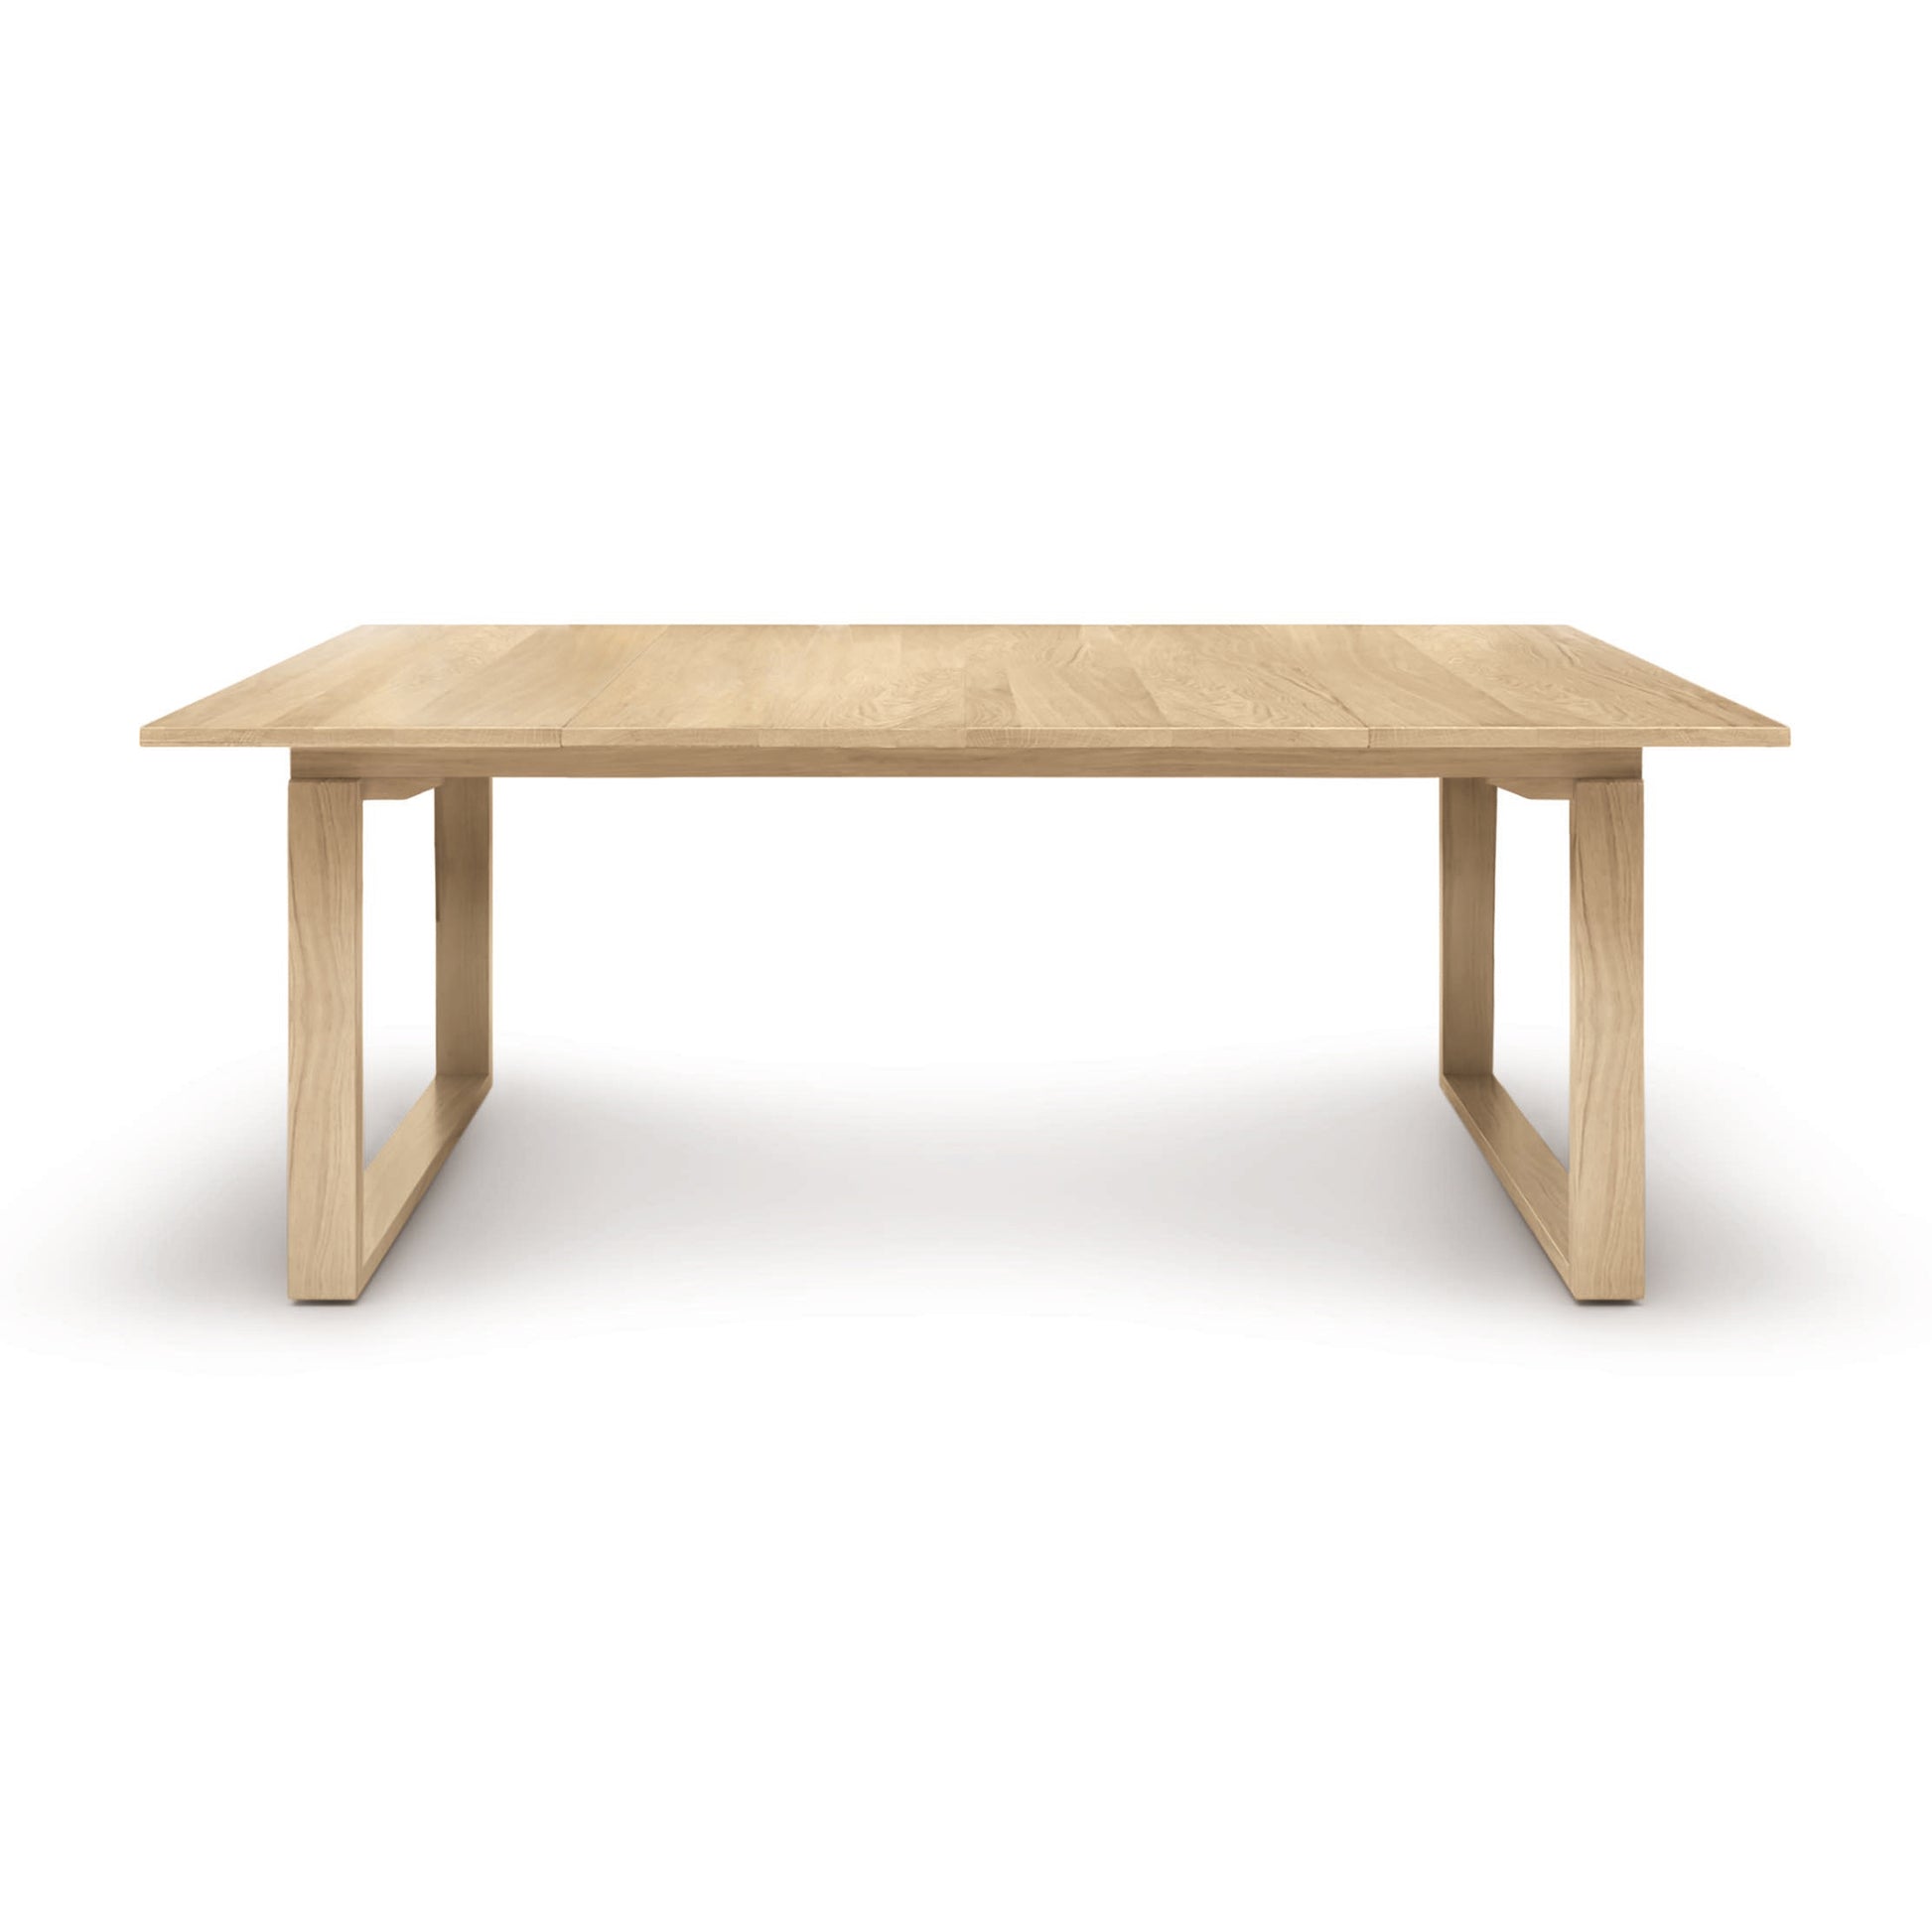 A simple Copeland Furniture Iso Oak Extension Dining Table with a rectangular top and sturdy legs, placed against a white background.